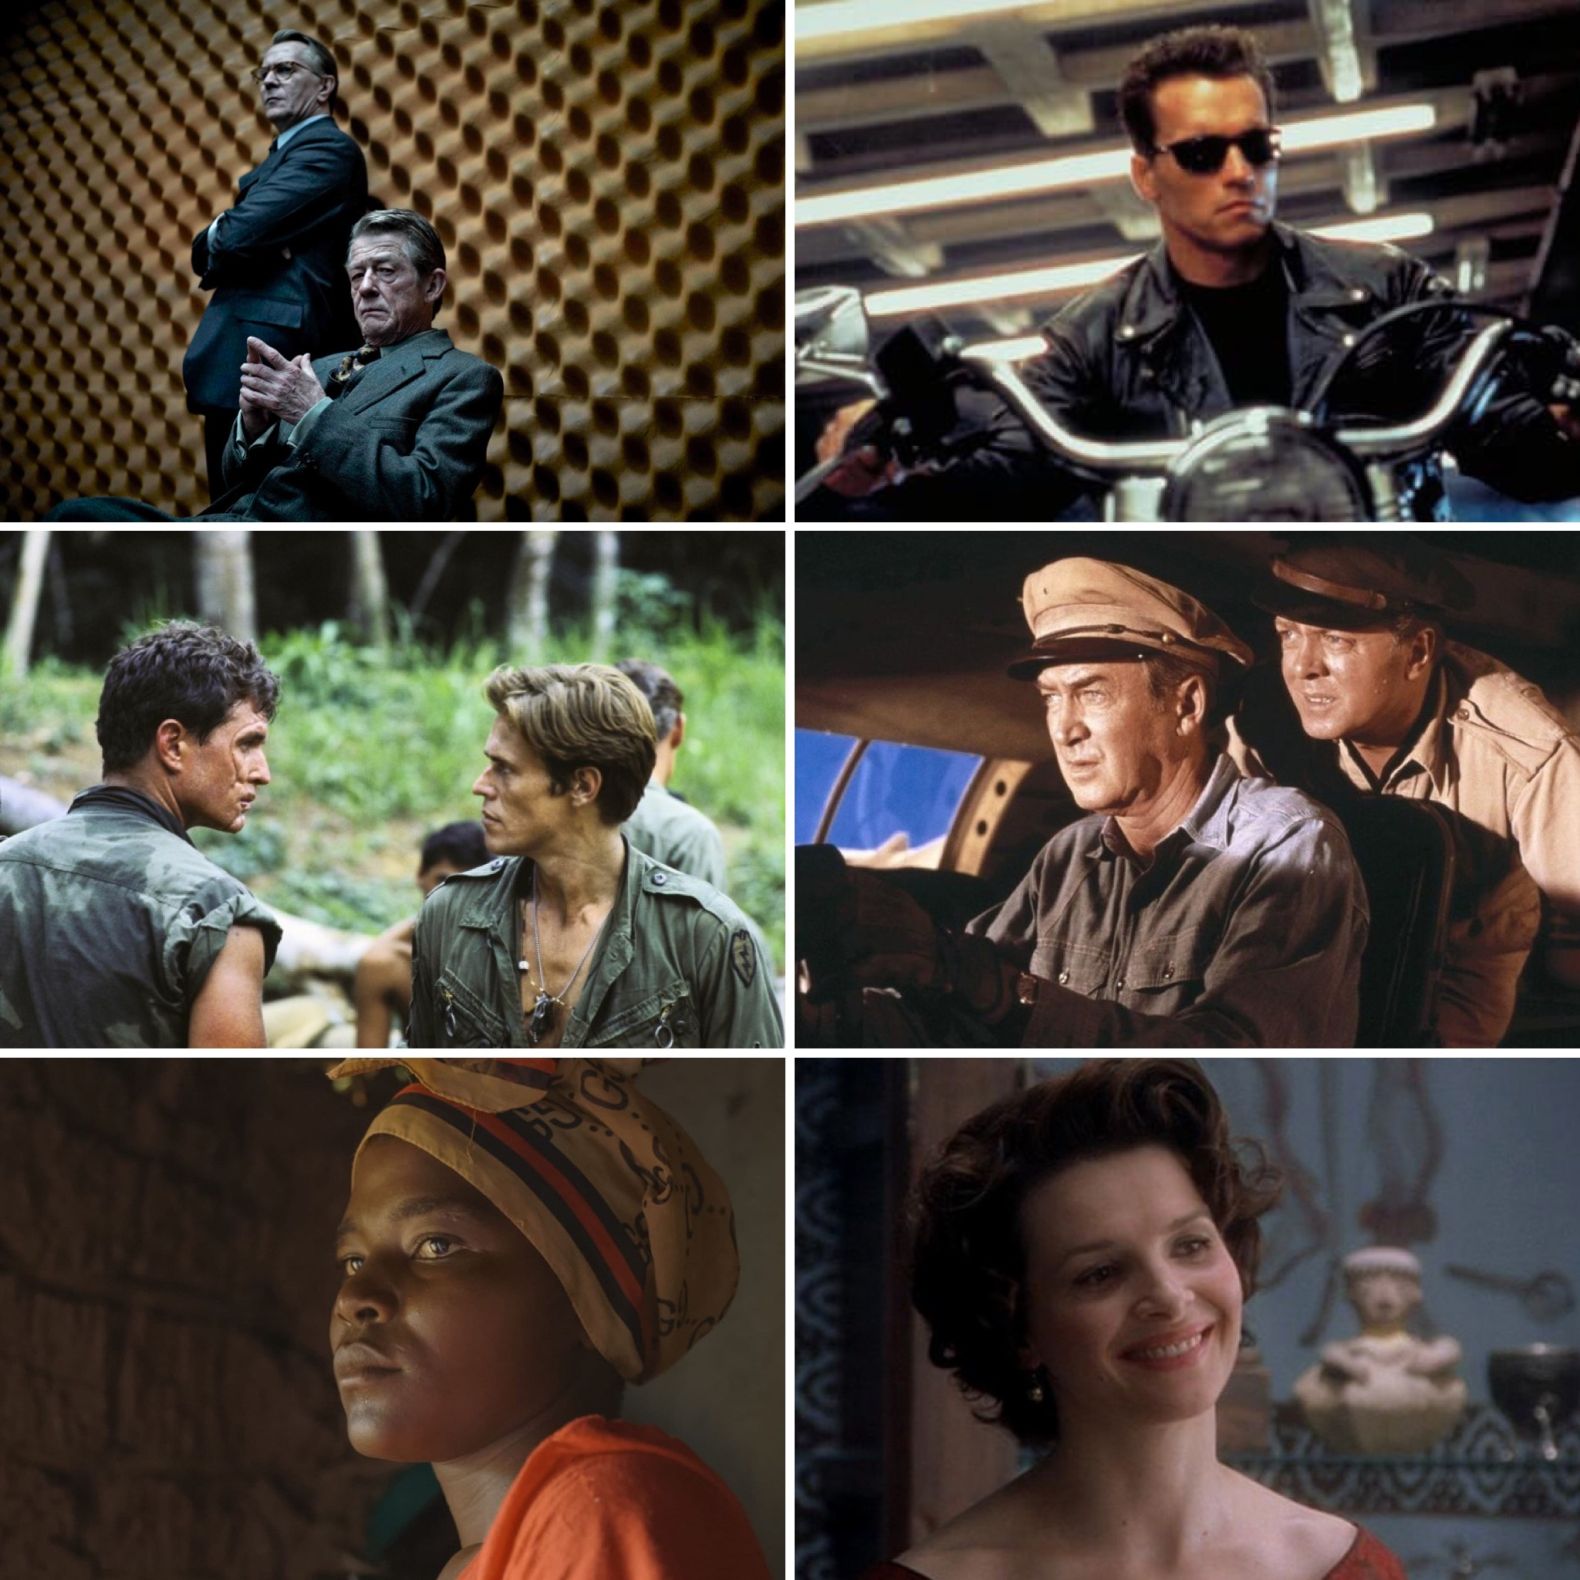 Duke Box #24: Our Guide to the Best Films on TV